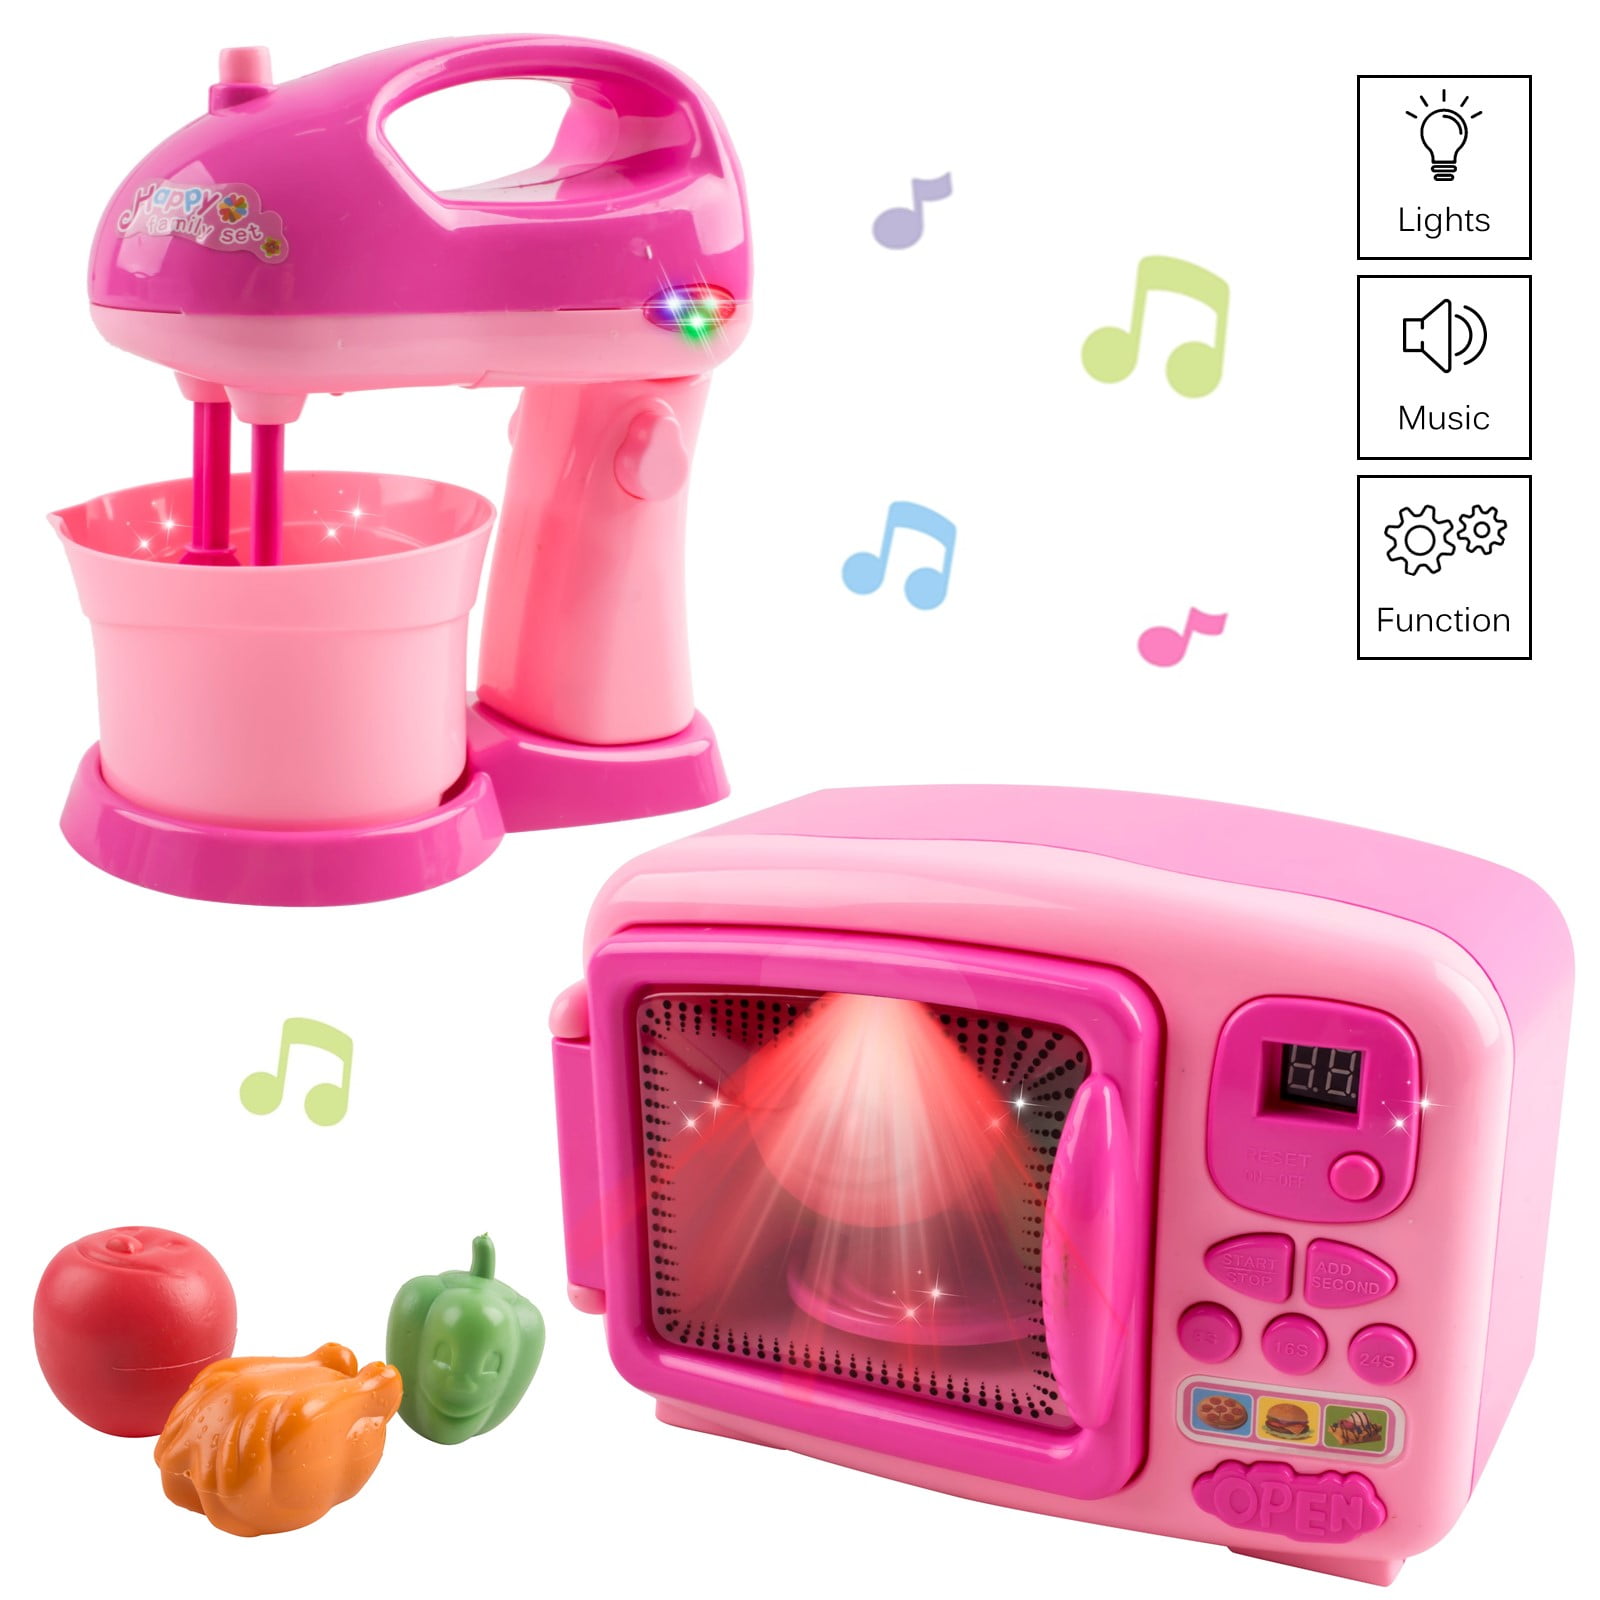 Kid Toy Microwave Oven Home Appliance Furniture Girl Pretend Role Play Xmas 